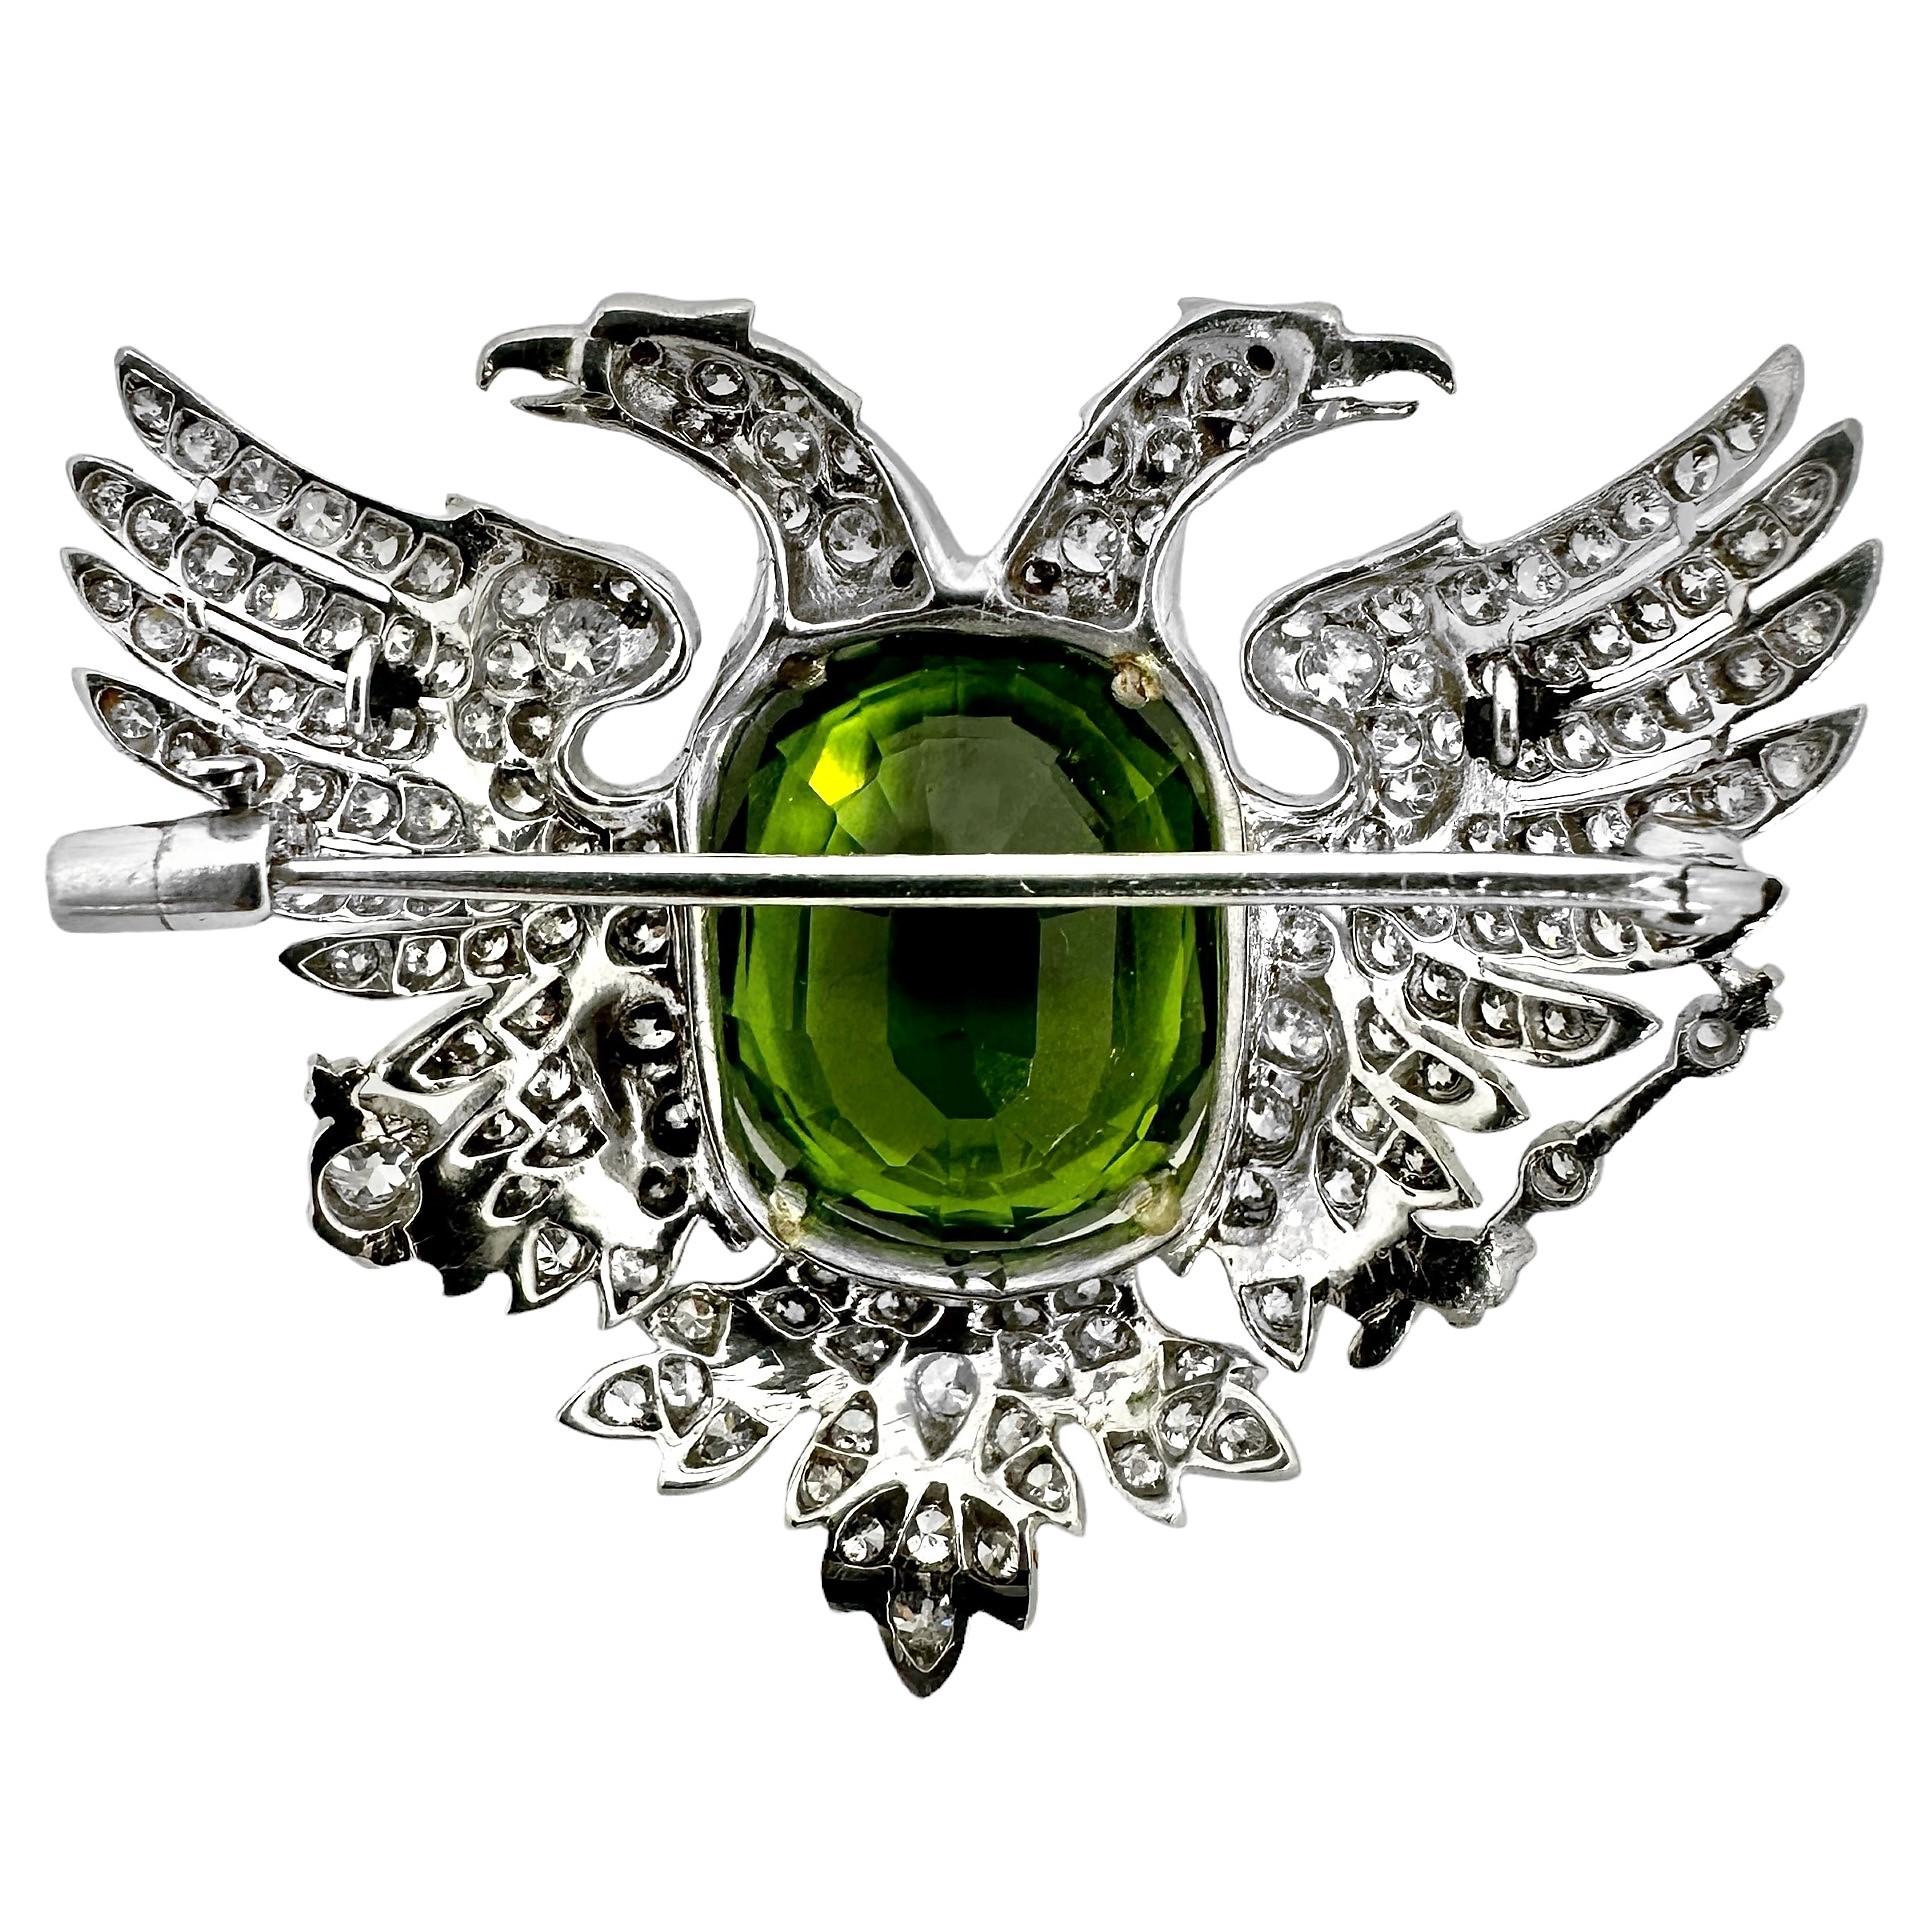 This amazing vintage platinum Russian Empire period brooch was deftly crafted depicting a double headed eagle holding a royal scepter with his right talon and a royal orb in his left. A Russian monarch would seat himself on the throne during the